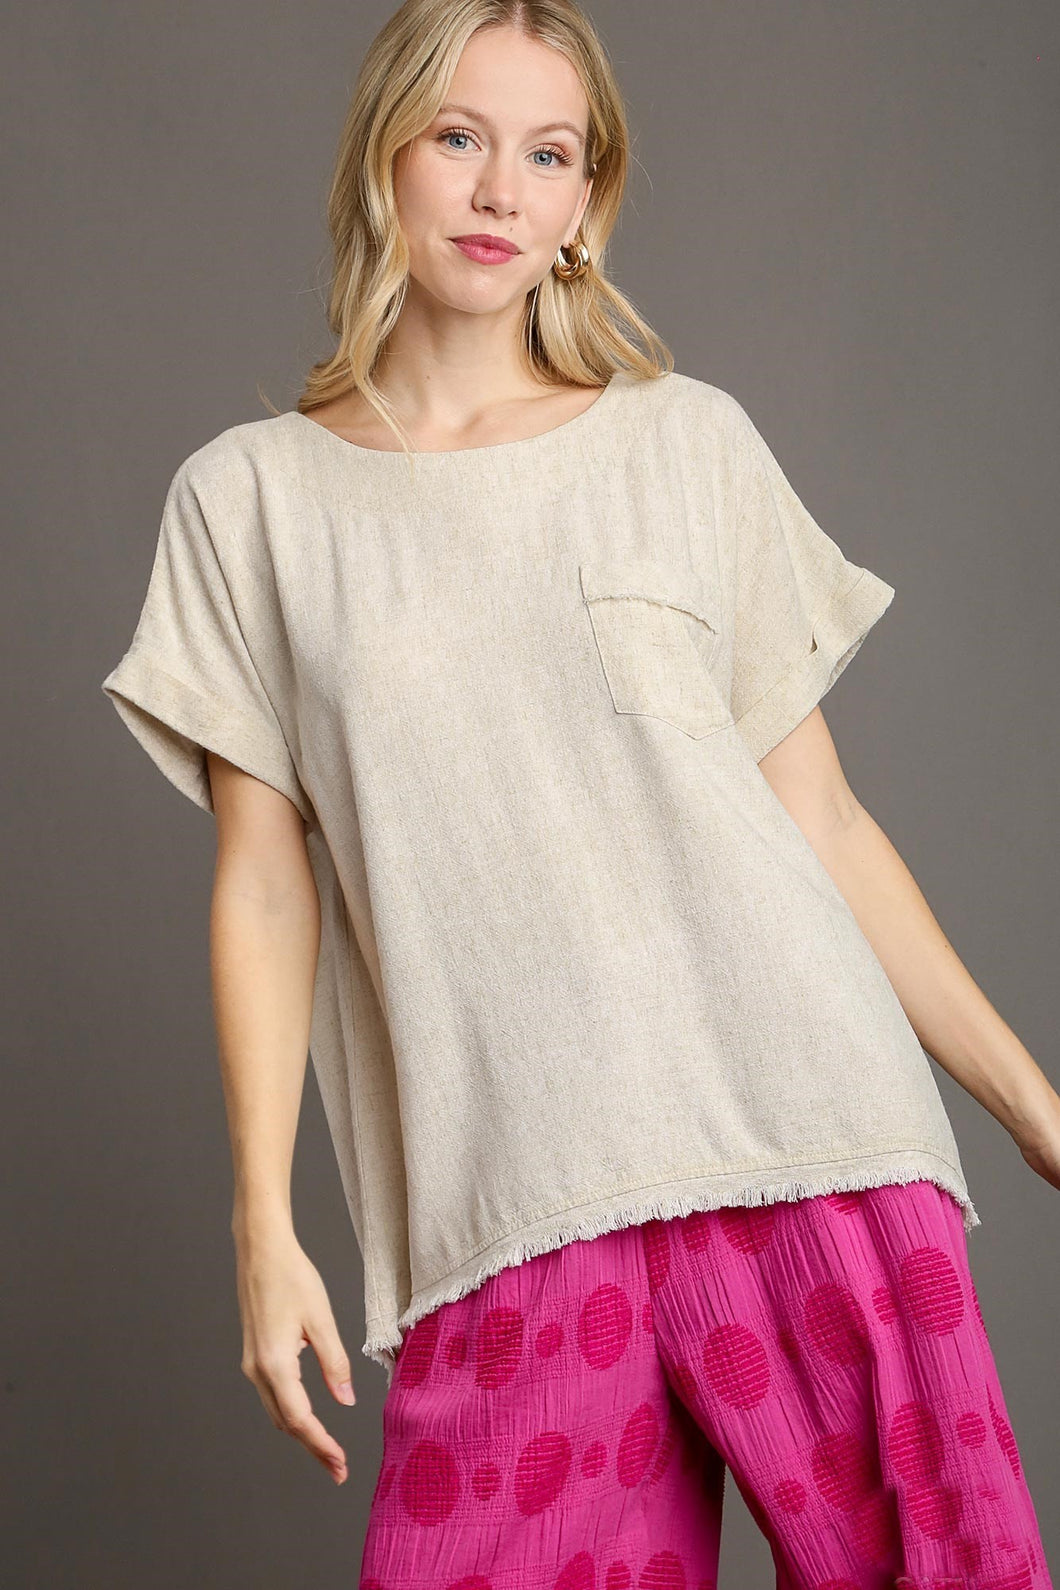 Umgee Solid Color Linen Blend Boxy Cut Top in Oatmeal Shirts & Tops Umgee   